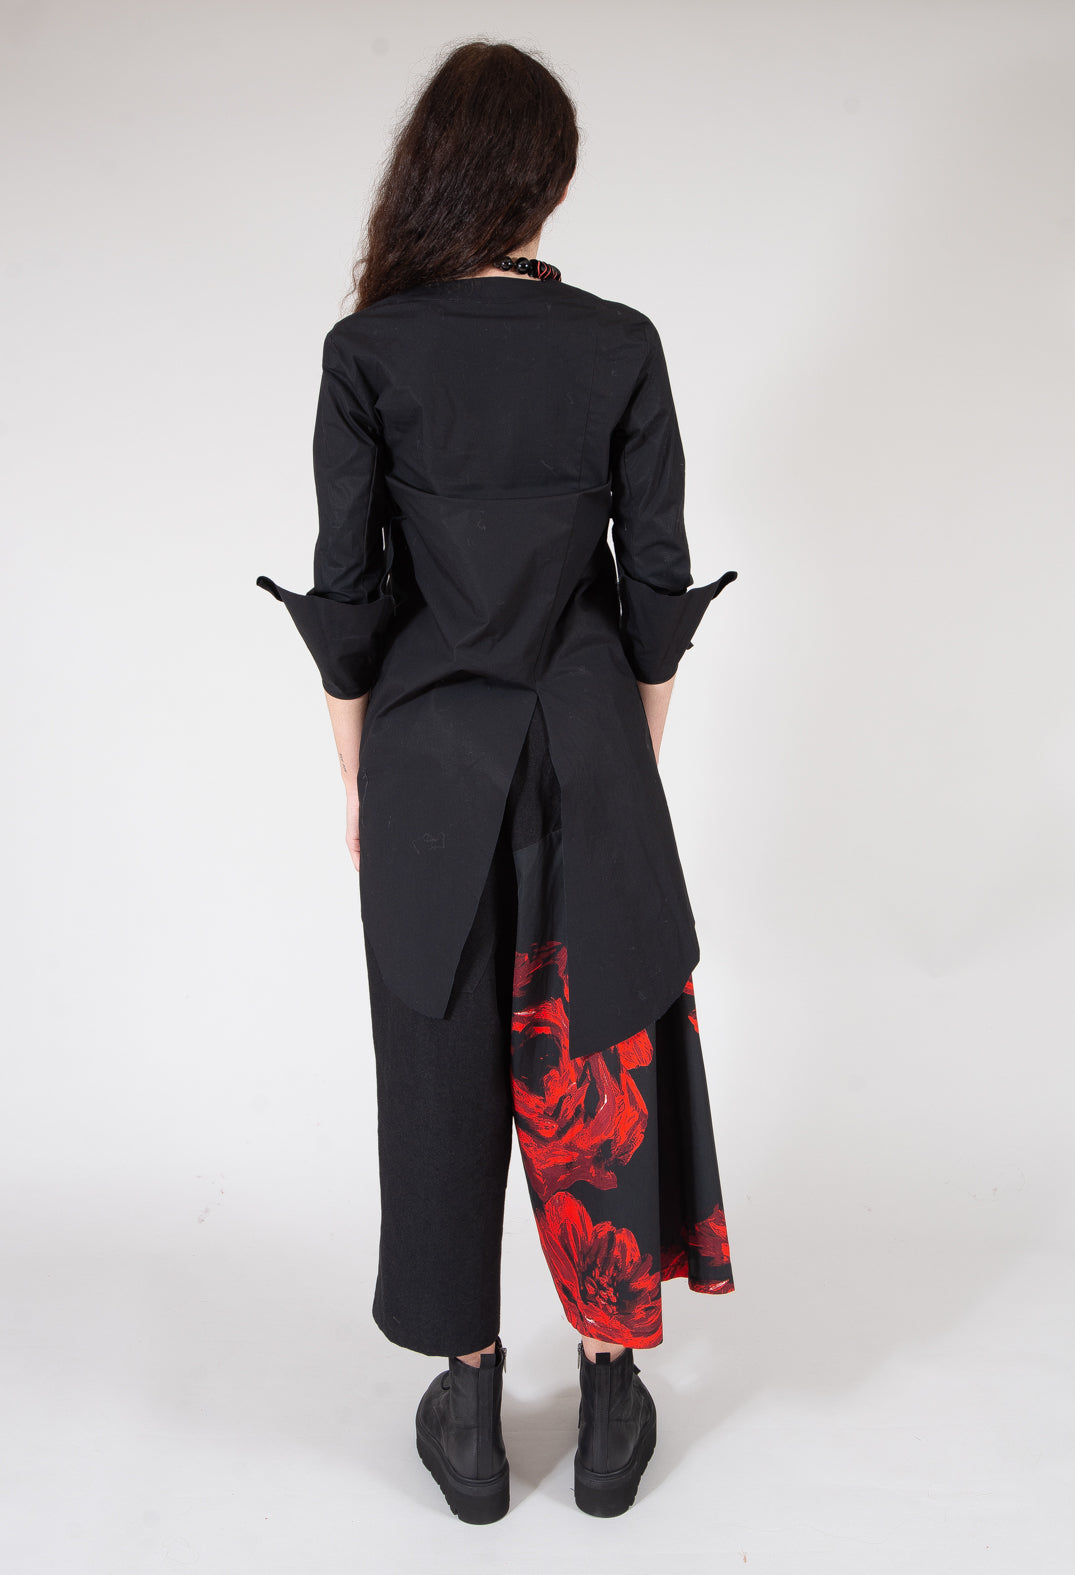 Wide Leg Dropcrotch Trousers with Contrasting Legs in Black and Red